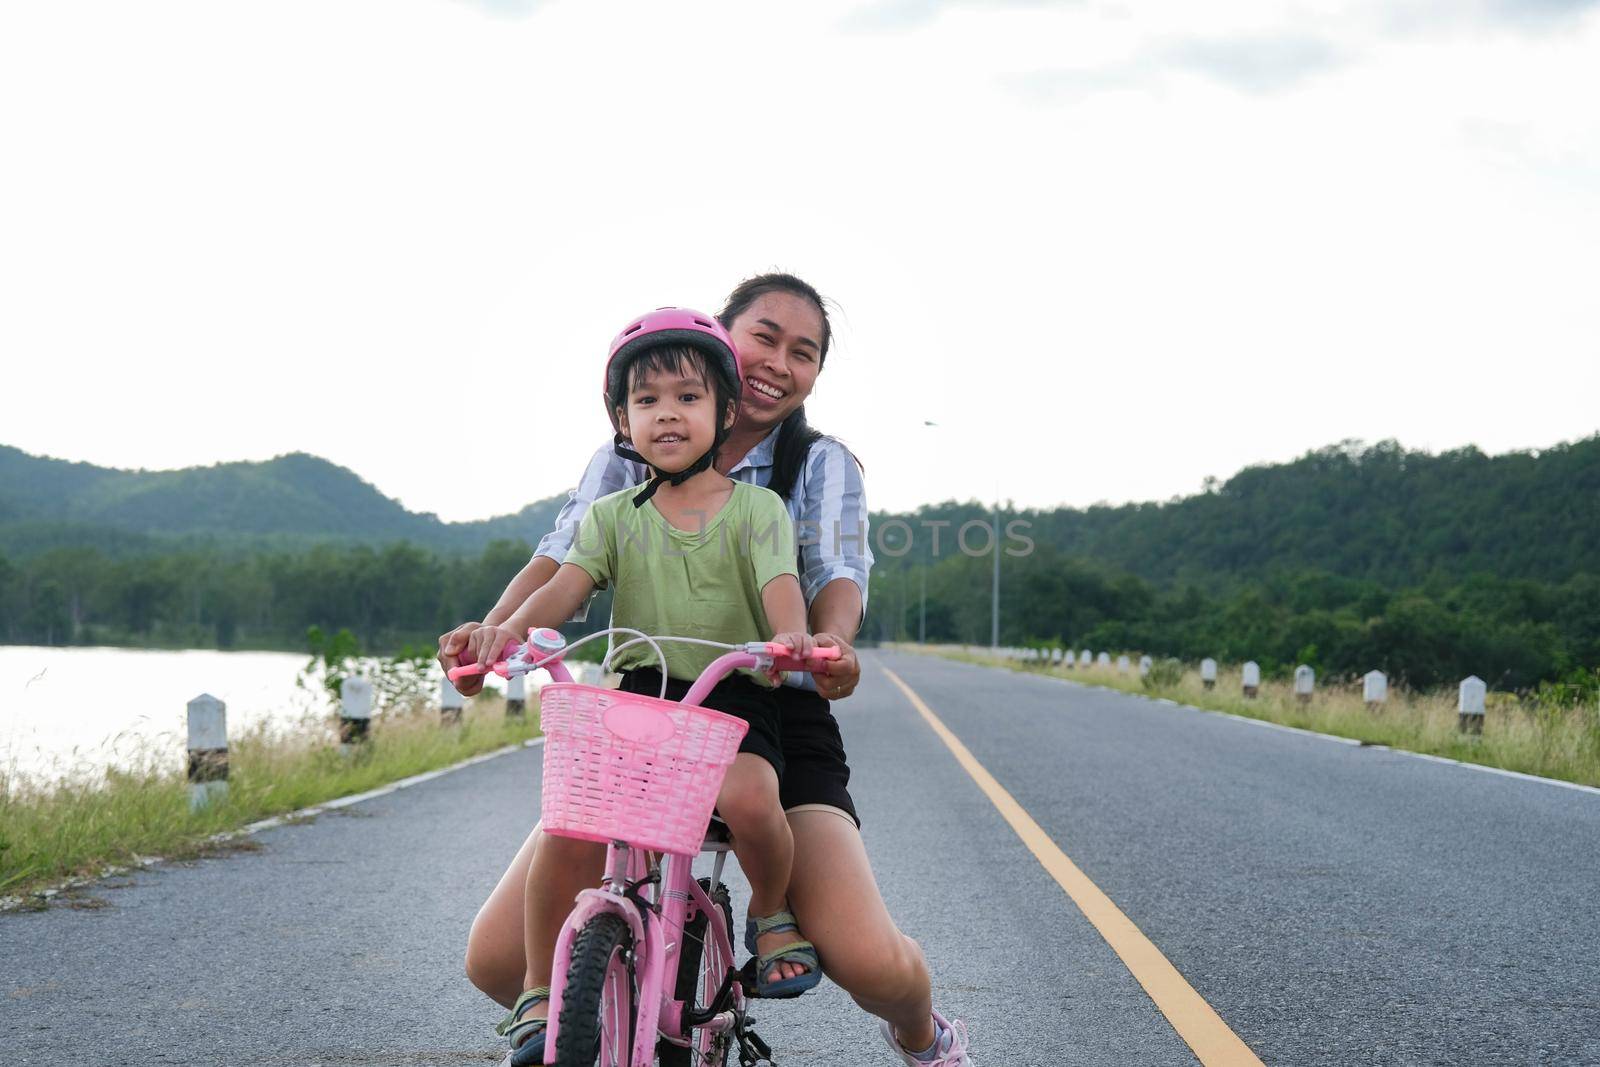 Cute little girl riding a bicycle with her mother on a lake road at sunset. Happy family doing outdoor activities together. Healthy Summer Activities for Kids.